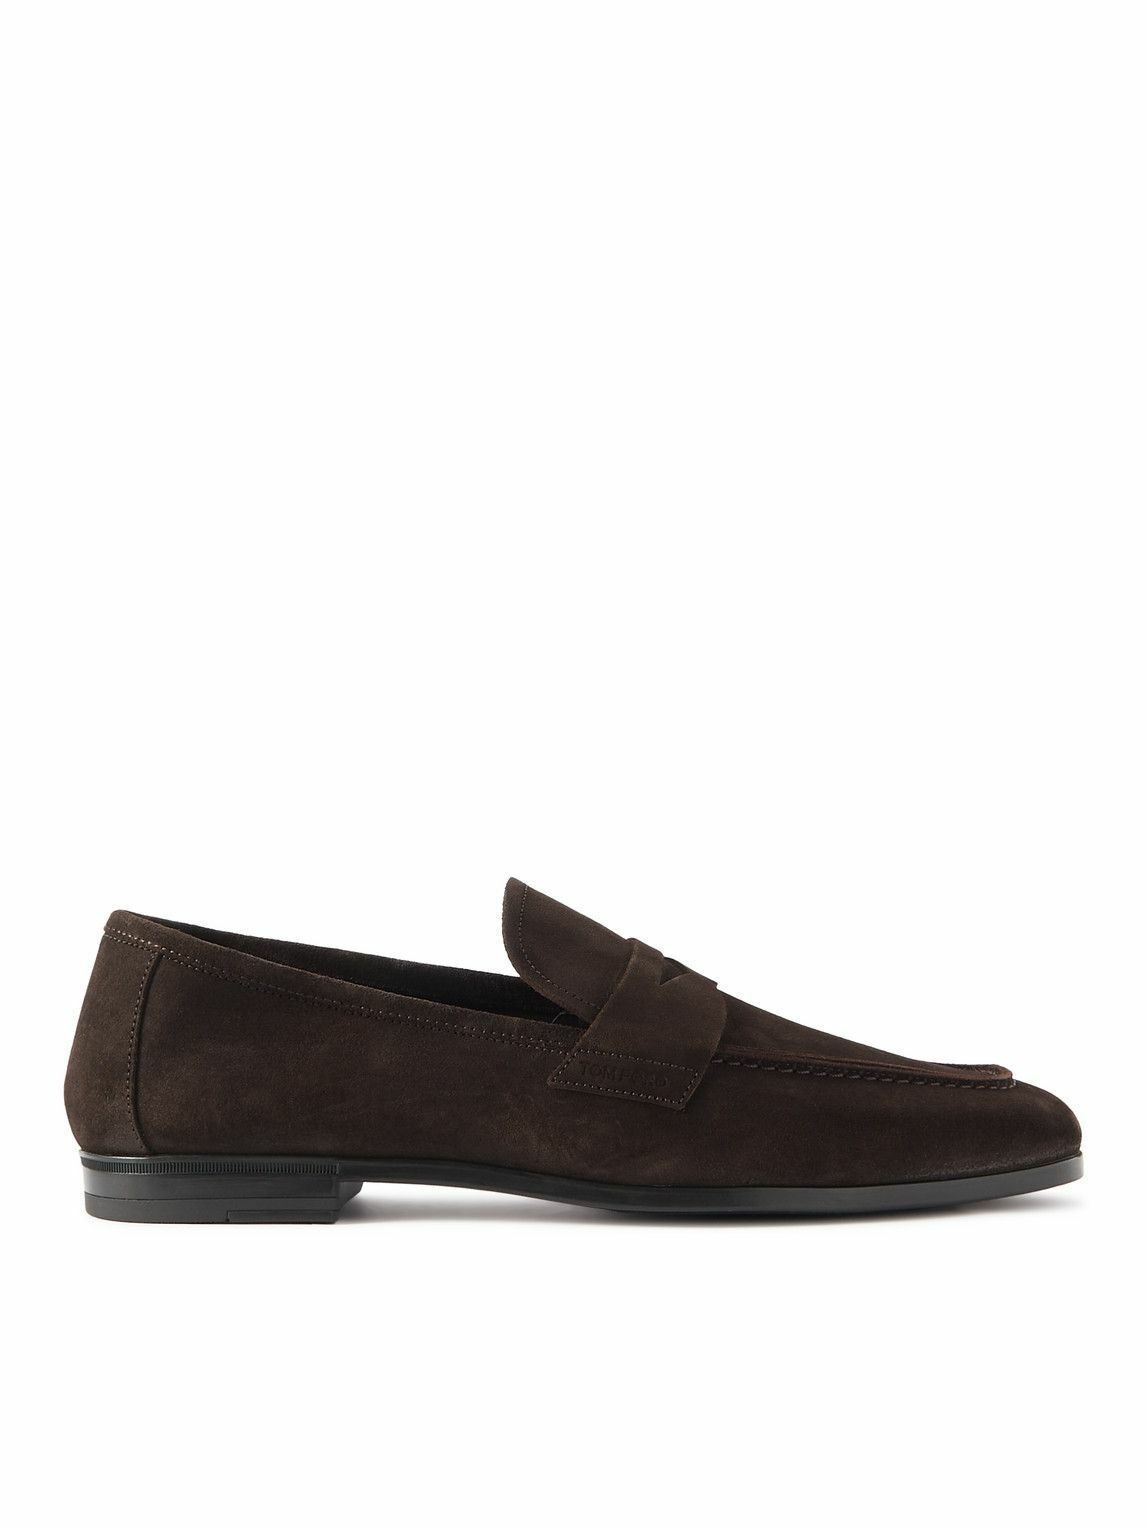 TOM FORD - Suede Loafers - Brown TOM FORD